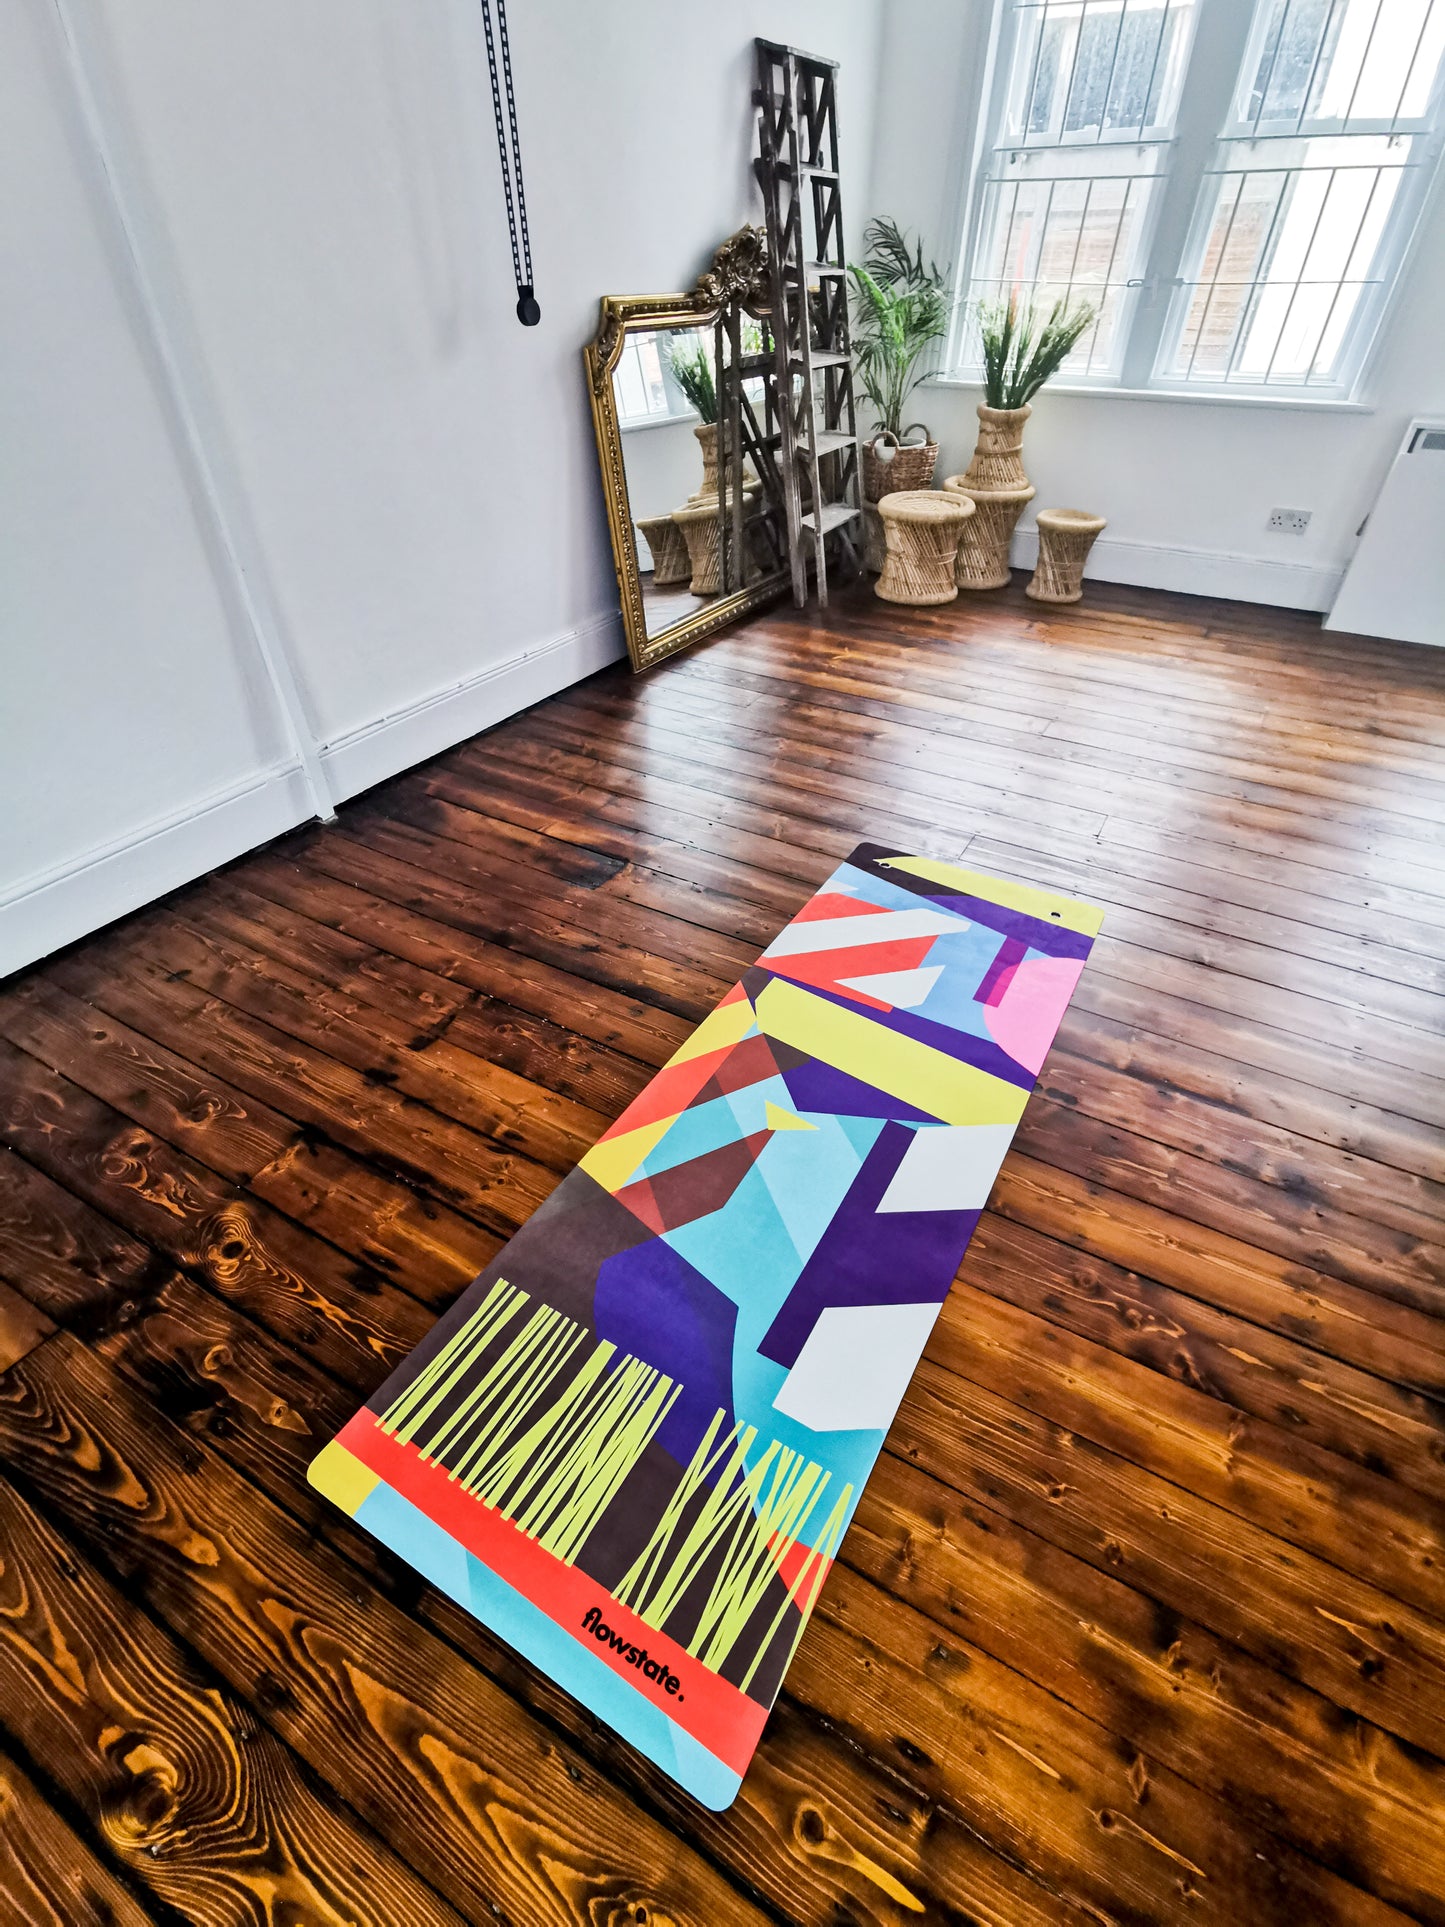 The Equilibrium 2 Flowstate Yoga Mat in an empty room